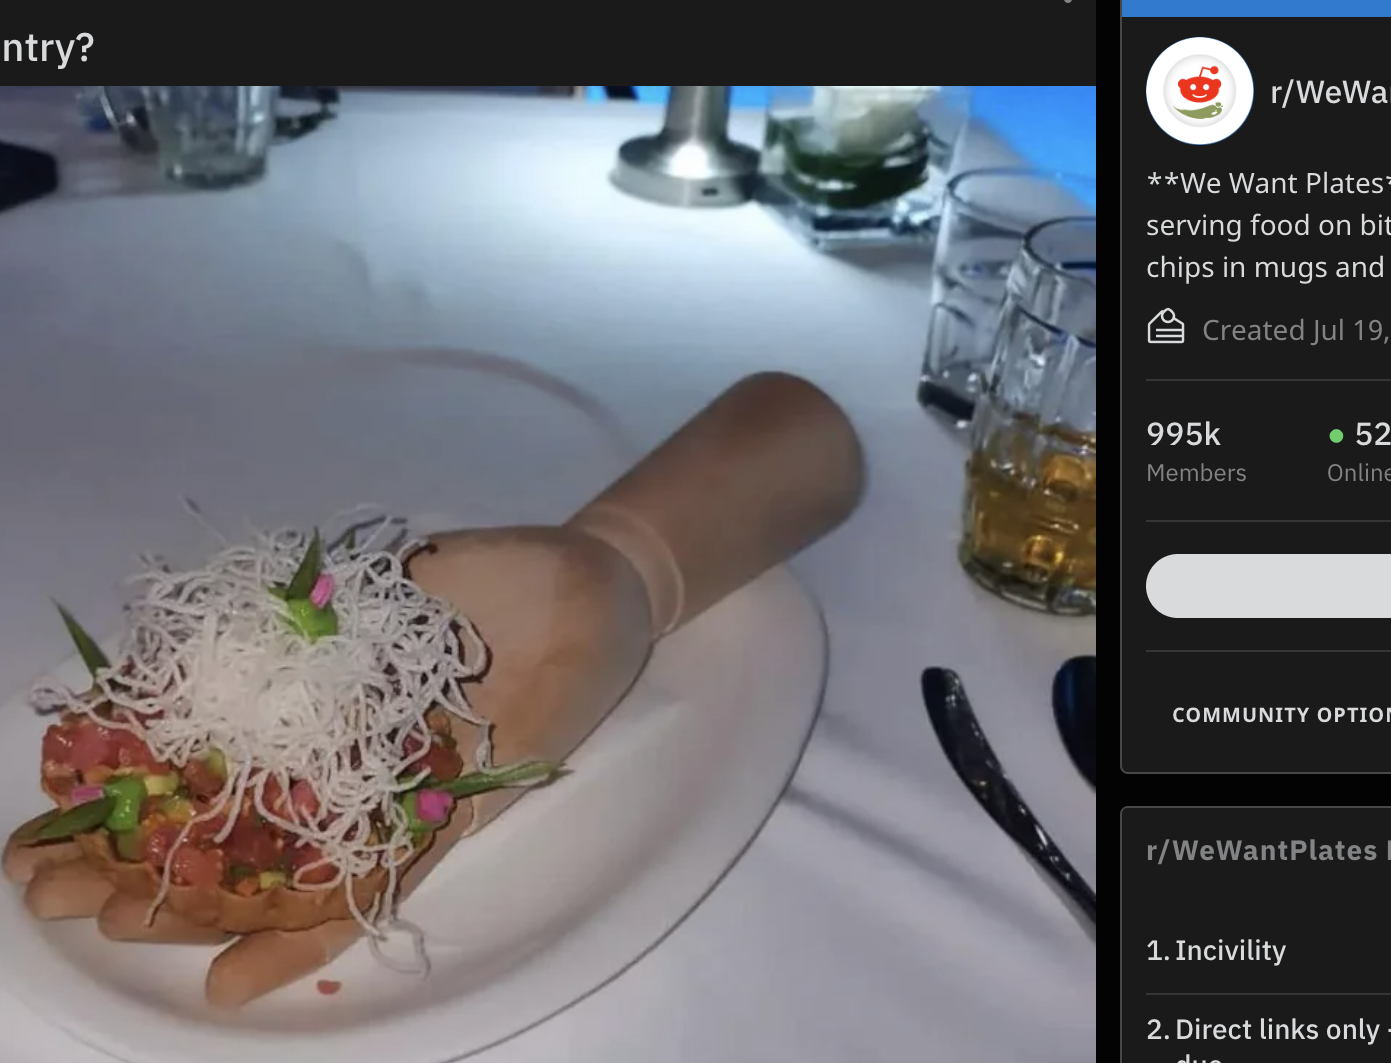 Salsa is served on a mannequin hand